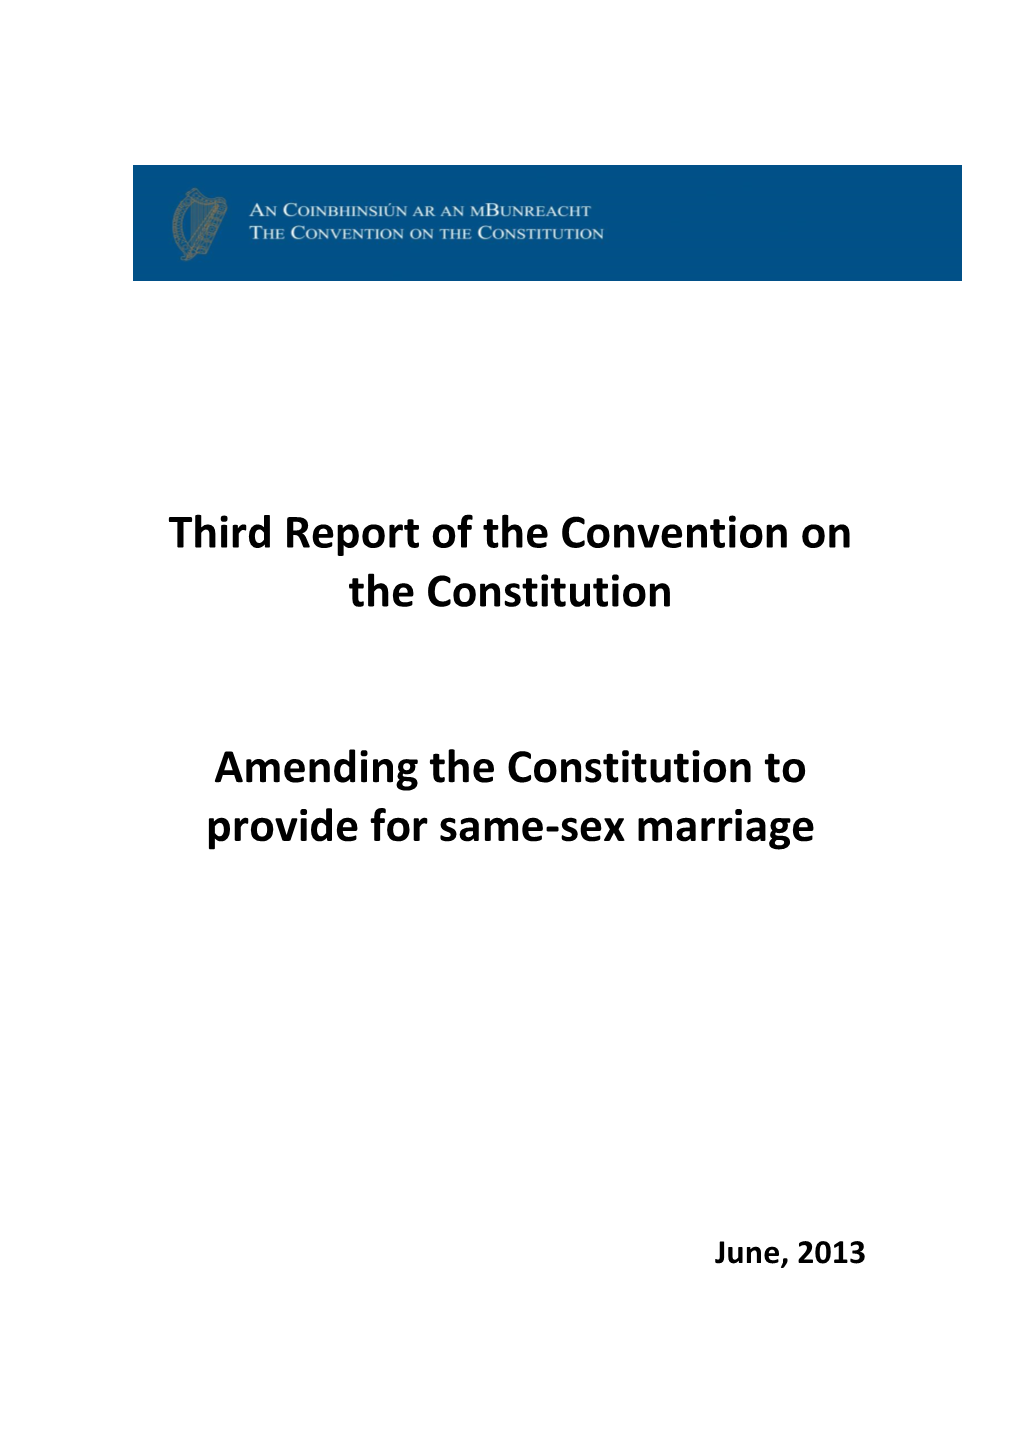 Third Report of the Convention on the Constitution Amending The